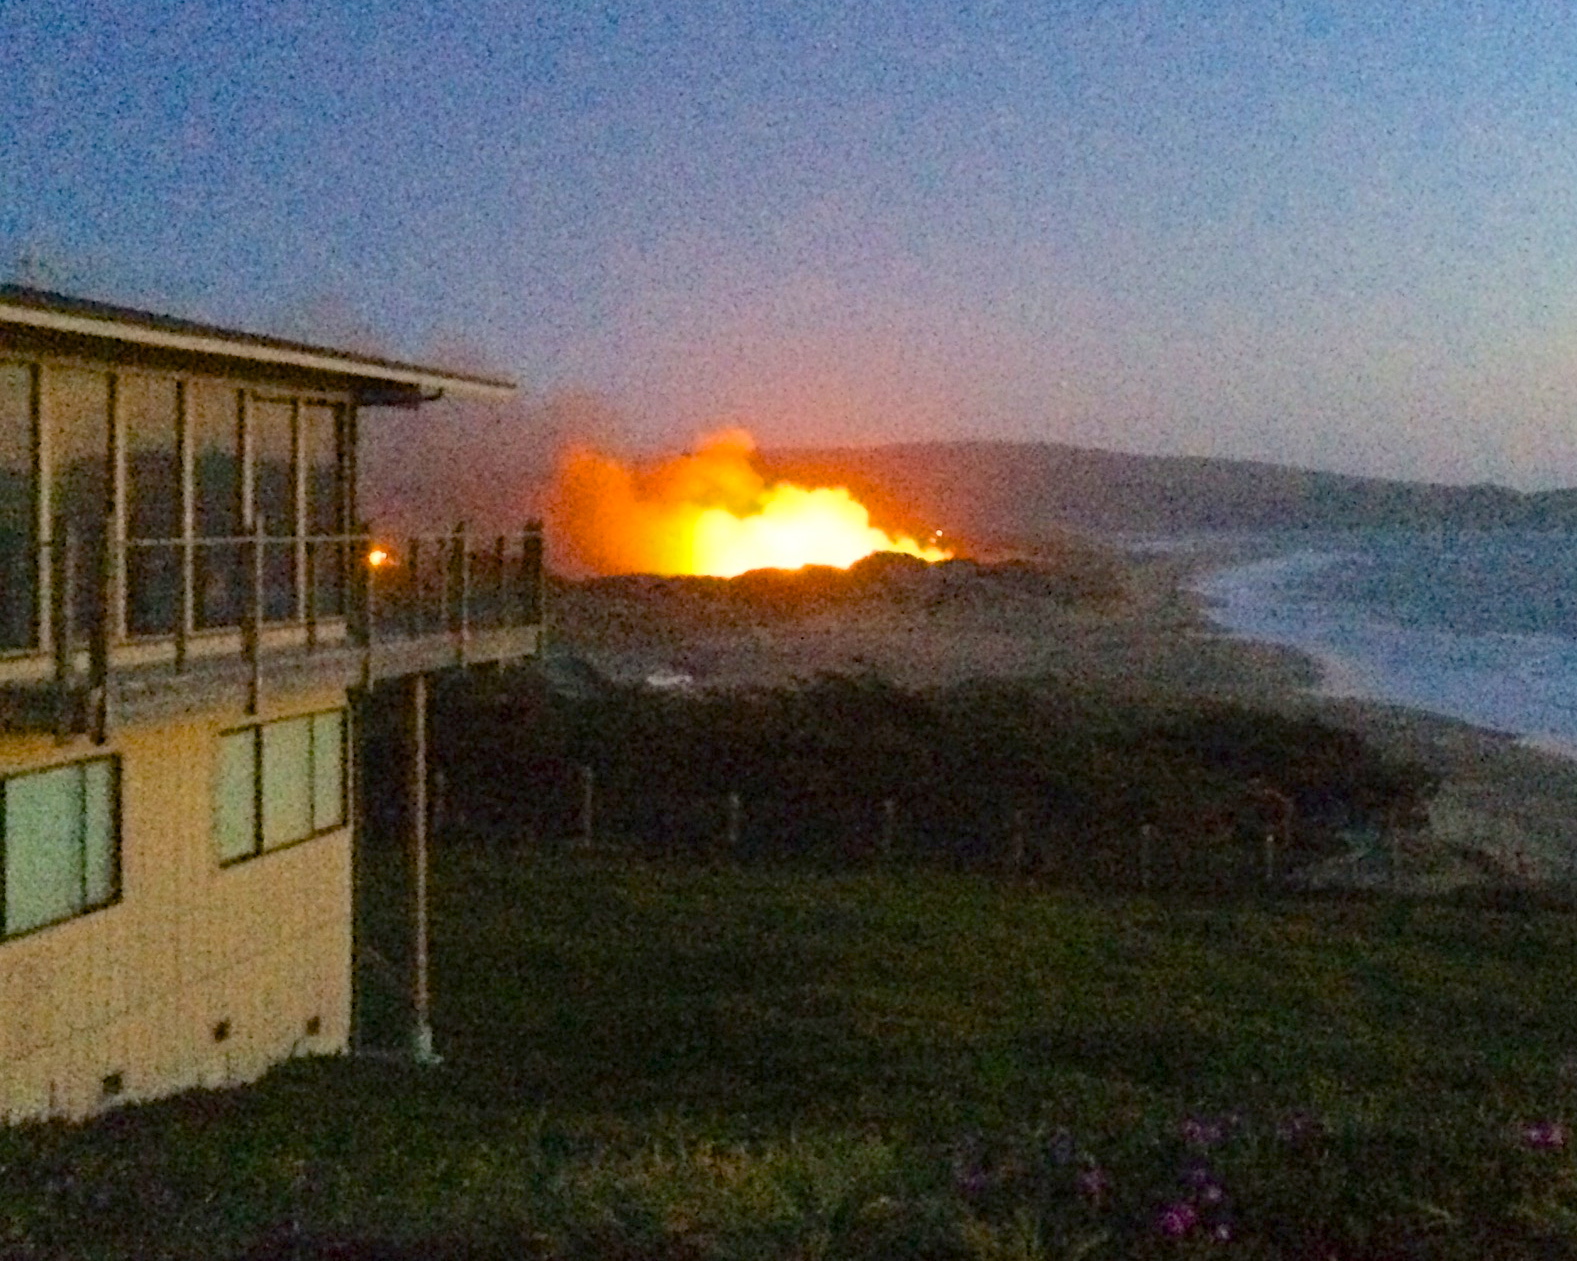 A view of the grass fire at Dillon Beach from several hundred yards away